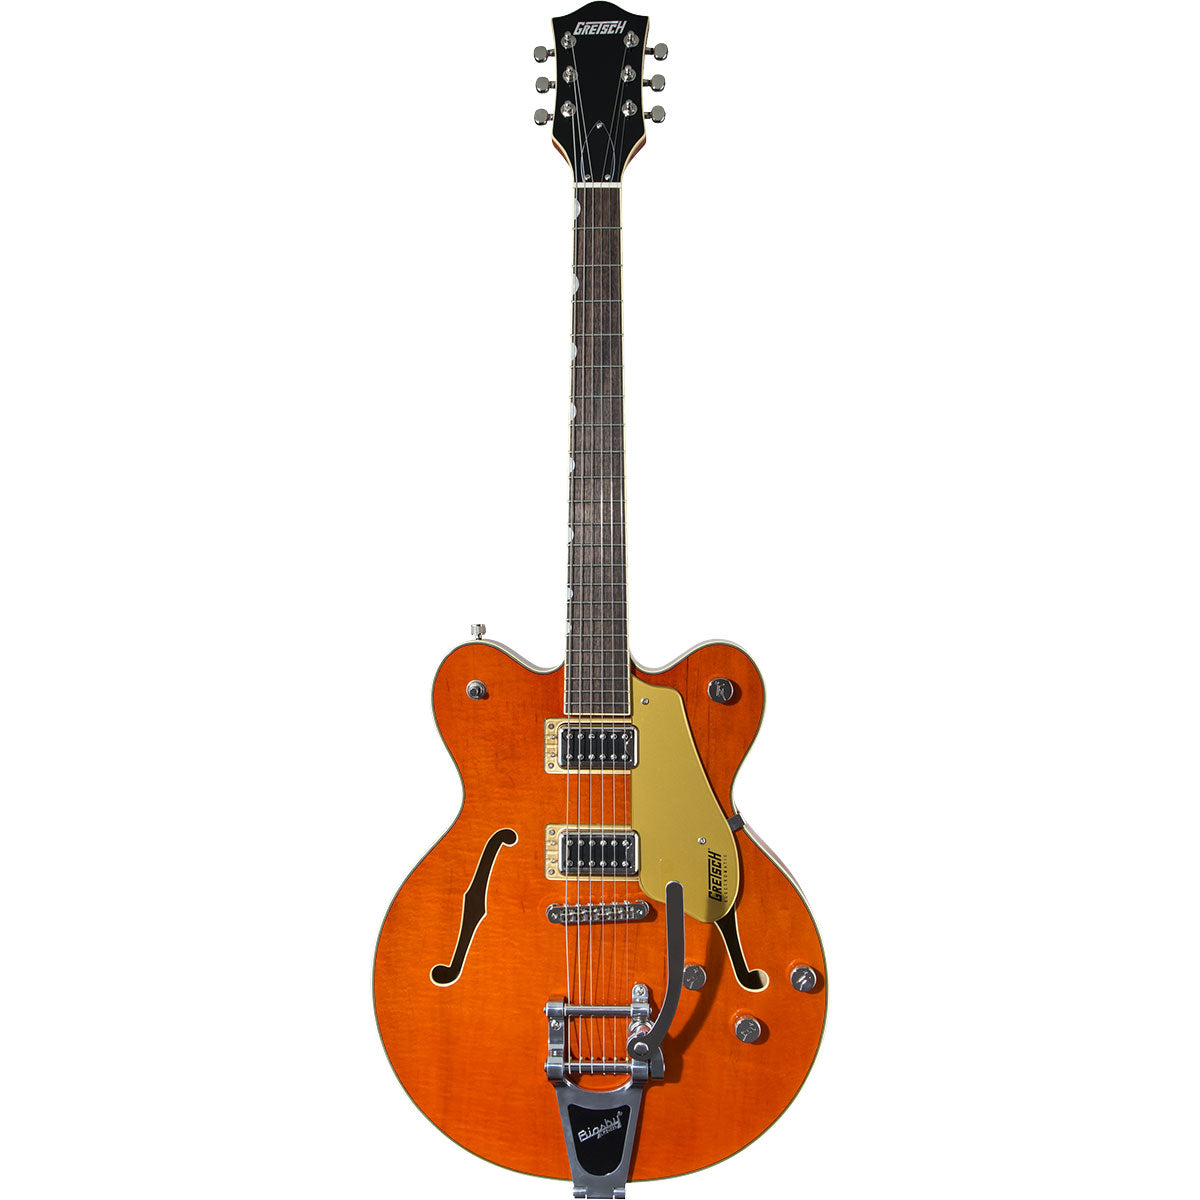 Top view of Gretsch G5622T Electromatic Center Block Guitar - Orange Stain